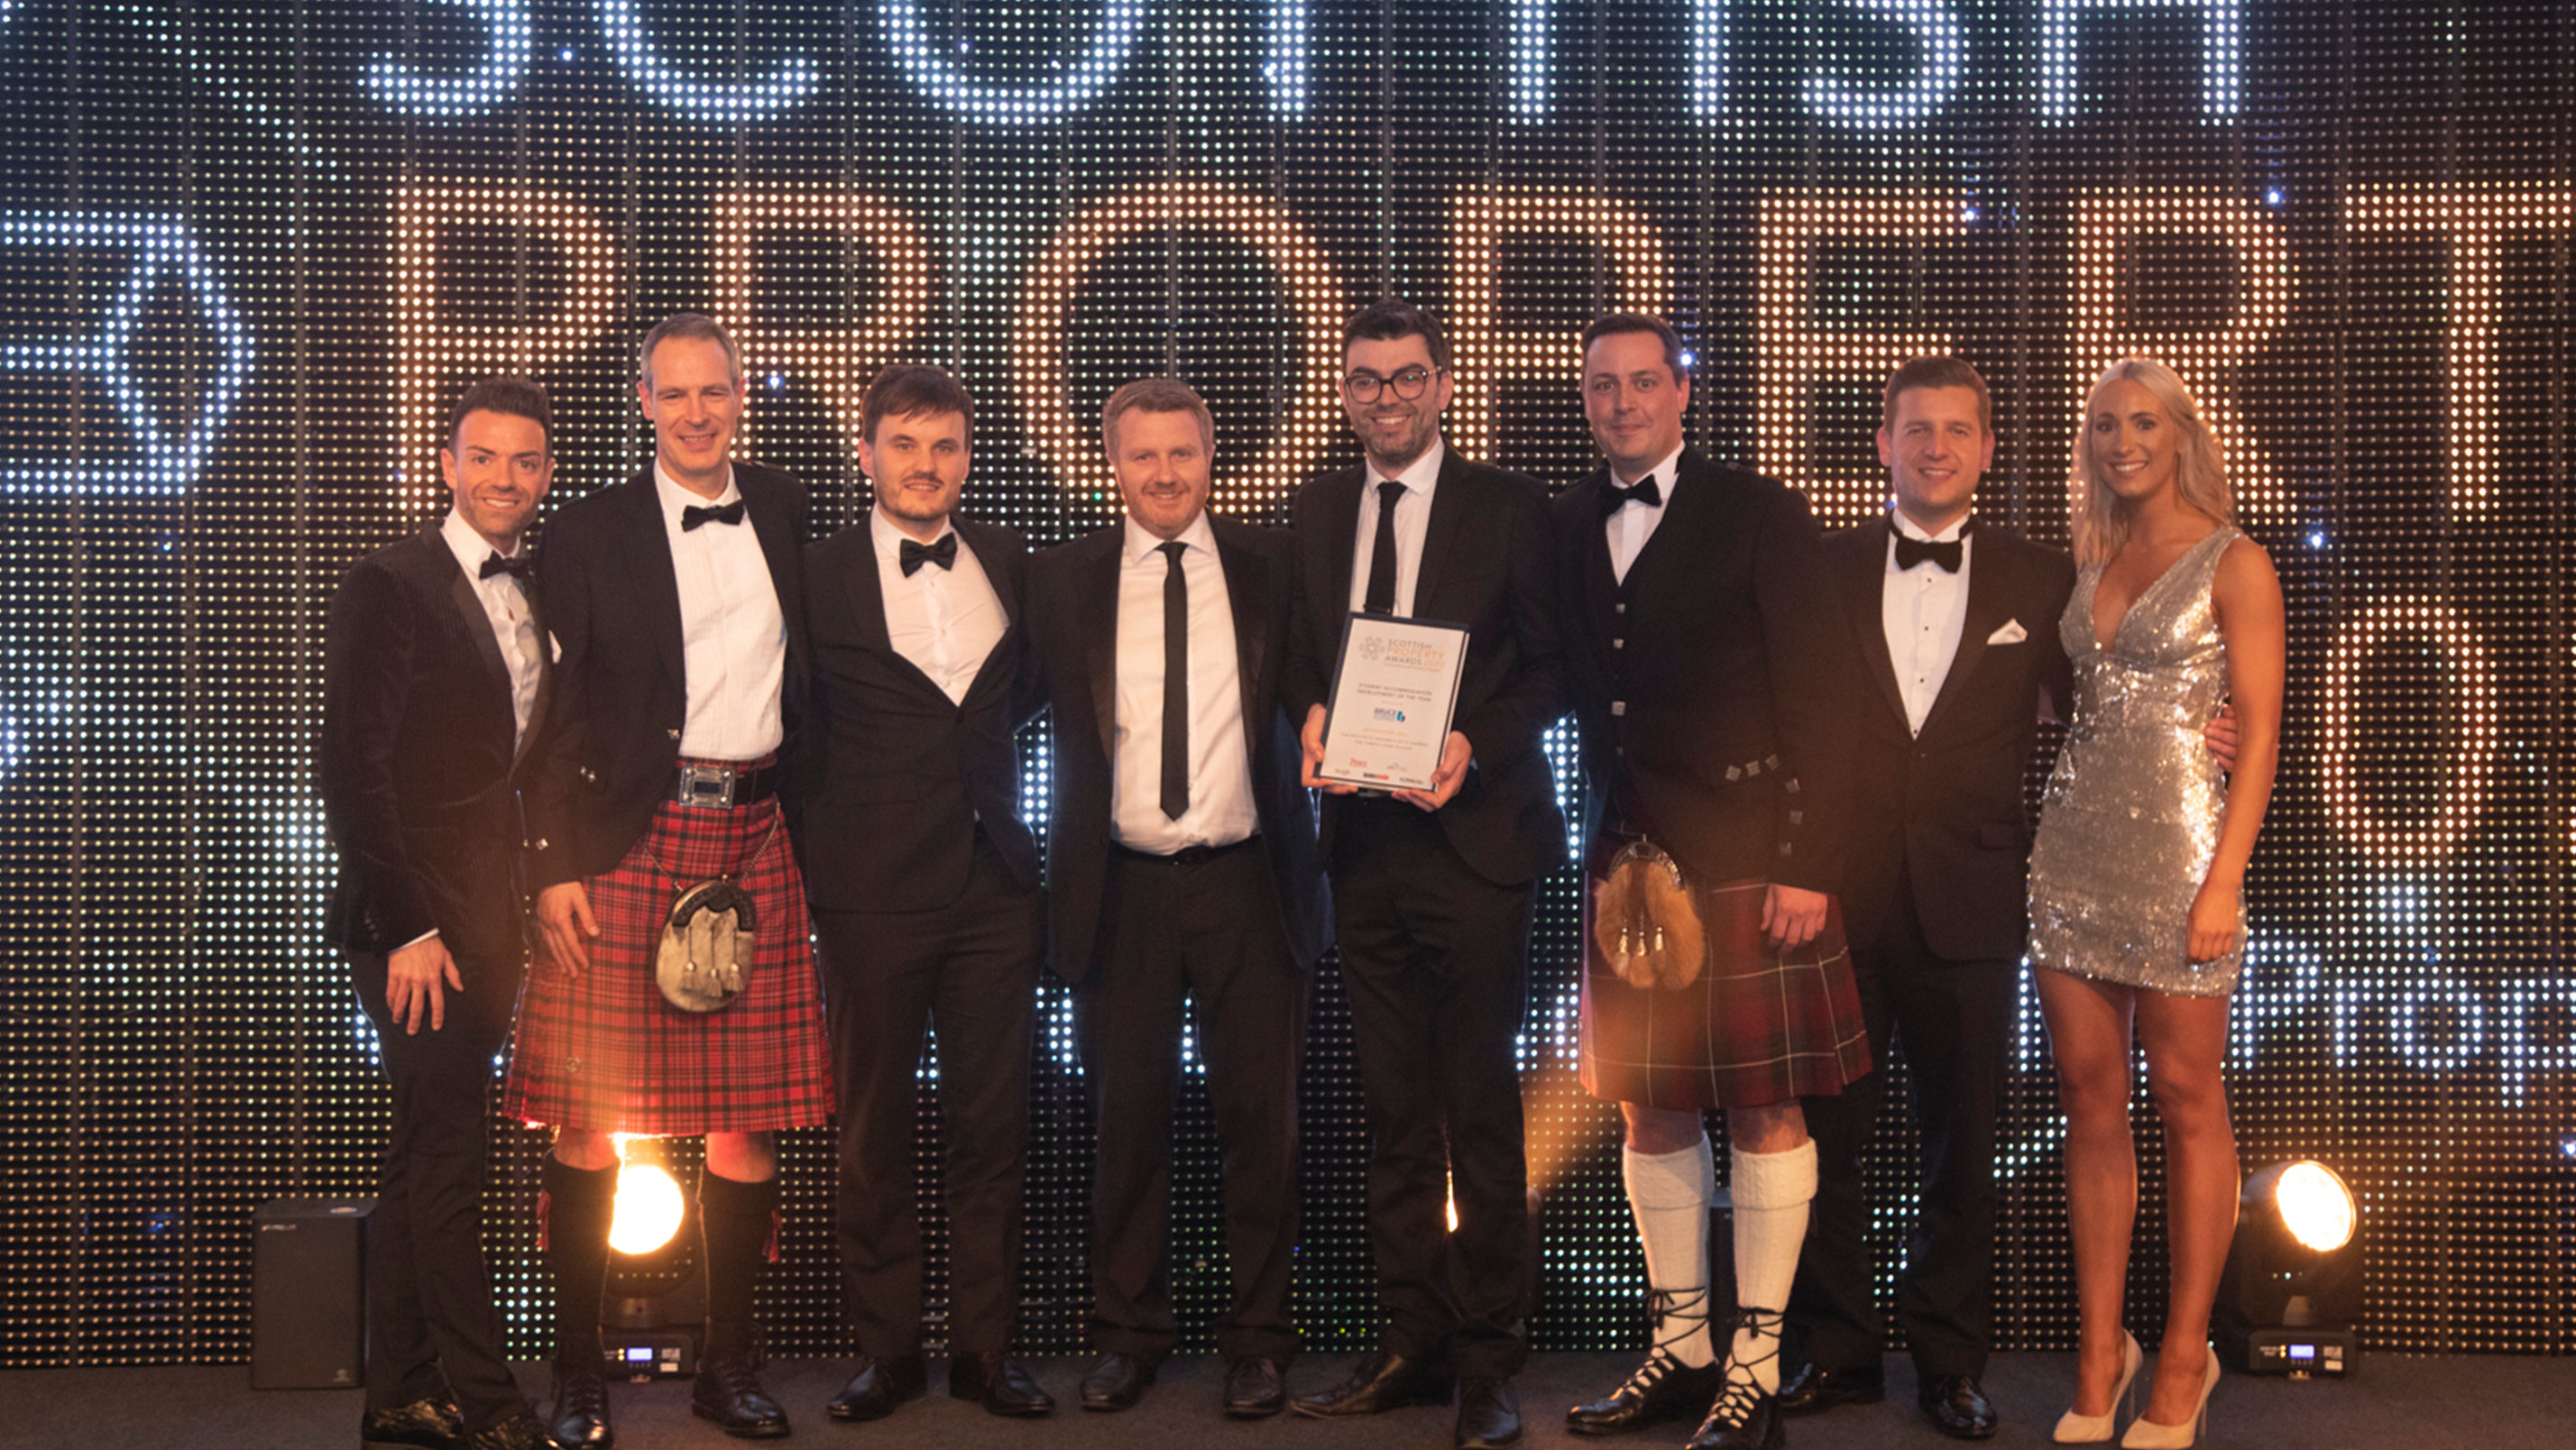 HLM student accommodation schemes recognised at industry awards